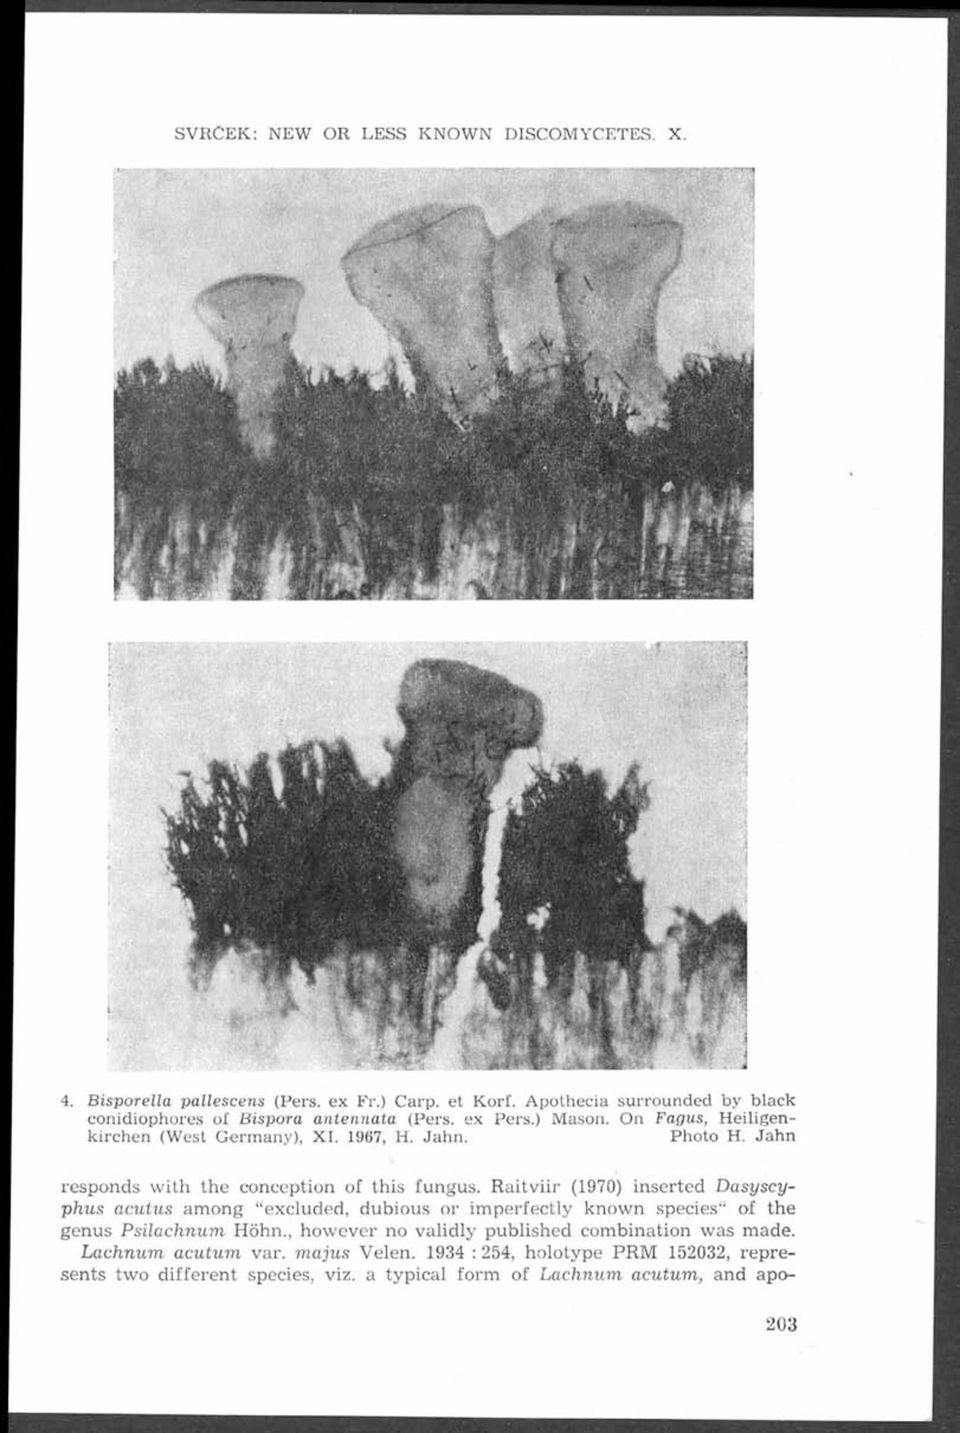 Ja h n responds w ith th e conception of this fungus. R aitv iir (1970) in serted D asyscyphus acutus am ong excluded, dubious or im perfectly know n species of th e genus Psilachnum öhn.